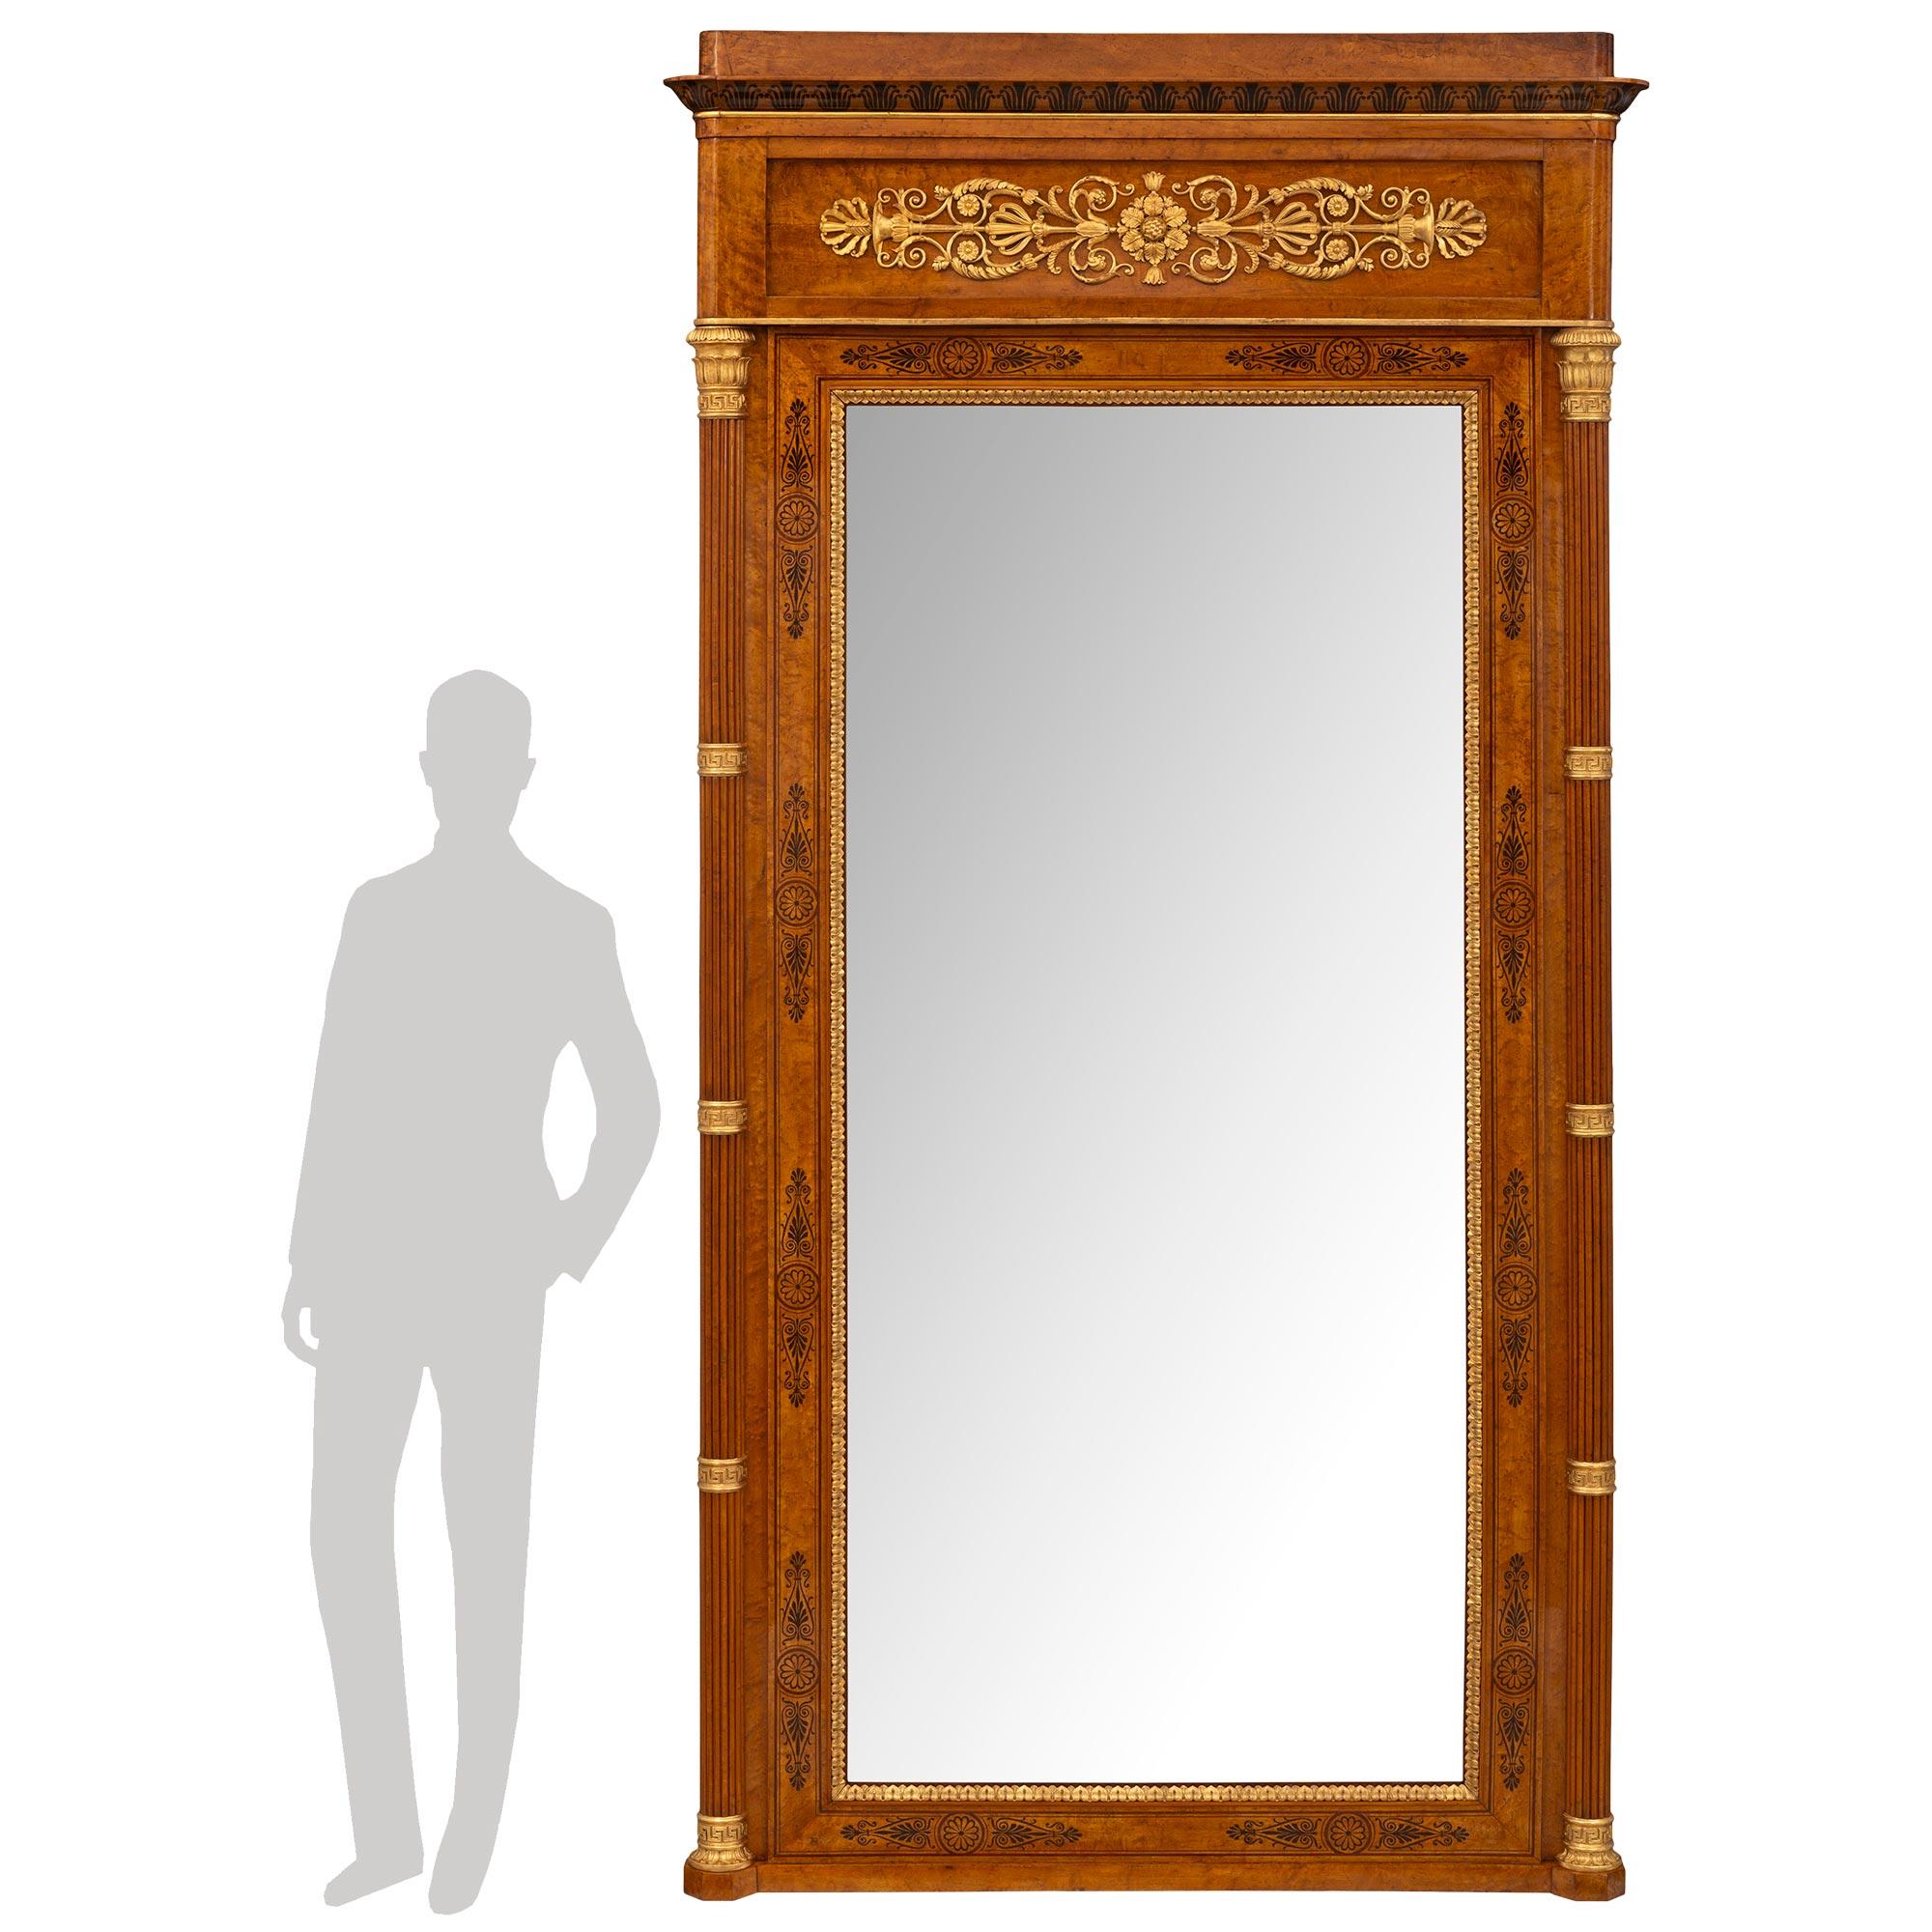 An impressive and most unique Italian 19th century Charles X period walnut, burl walnut and giltwood mirror. The large scale mirror retains it's original mirror plate framed in a charming and finely detailed giltwood foliate wrap around band with